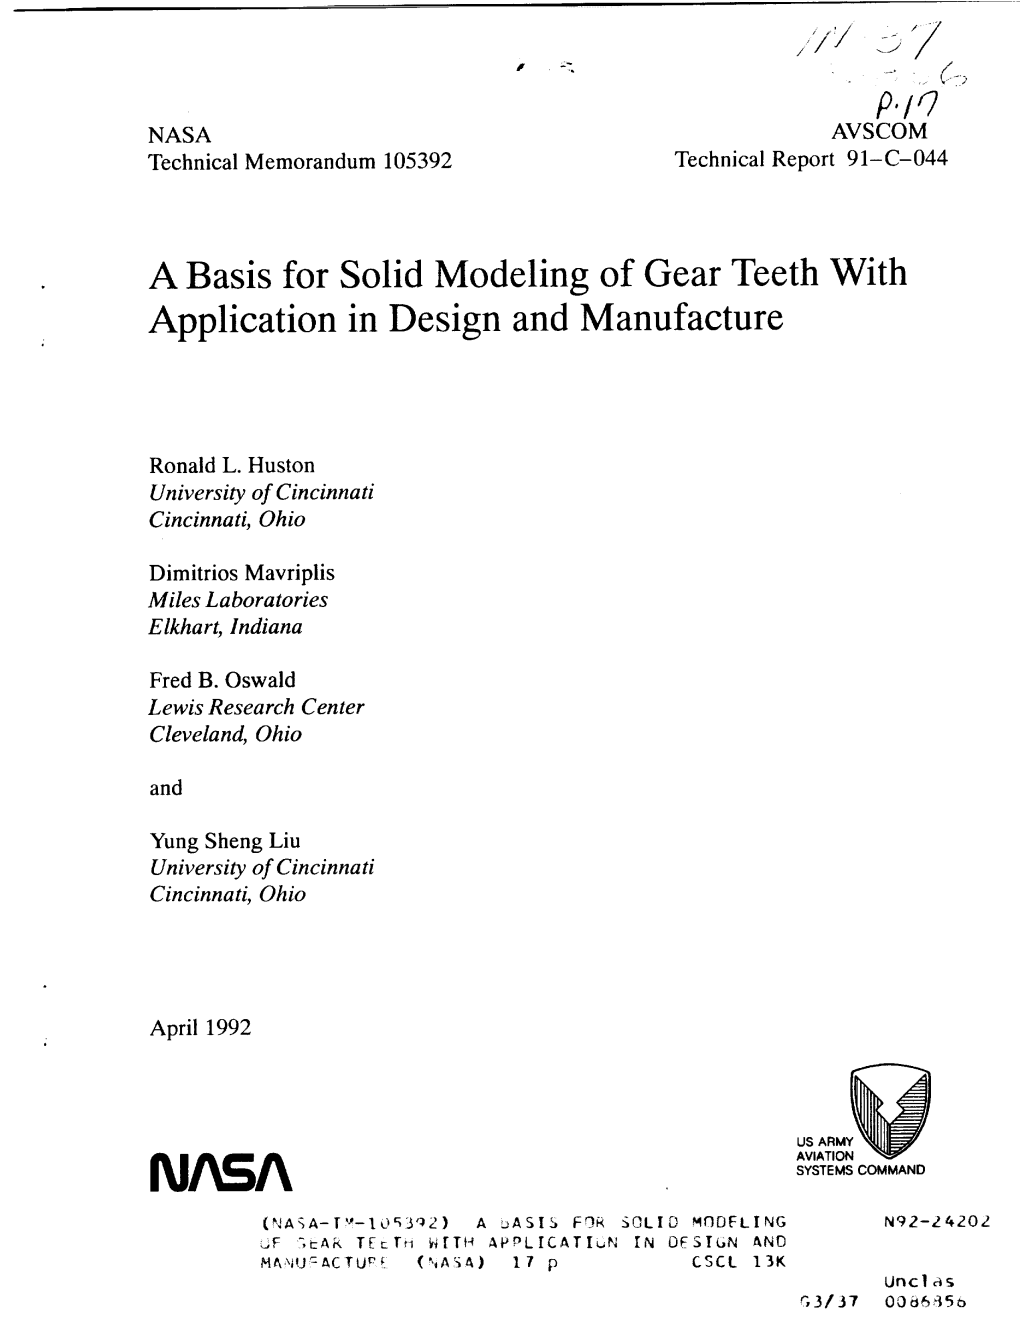 A Basis for Solid Modeling of Gear Teeth with Application in Design and Manufacture